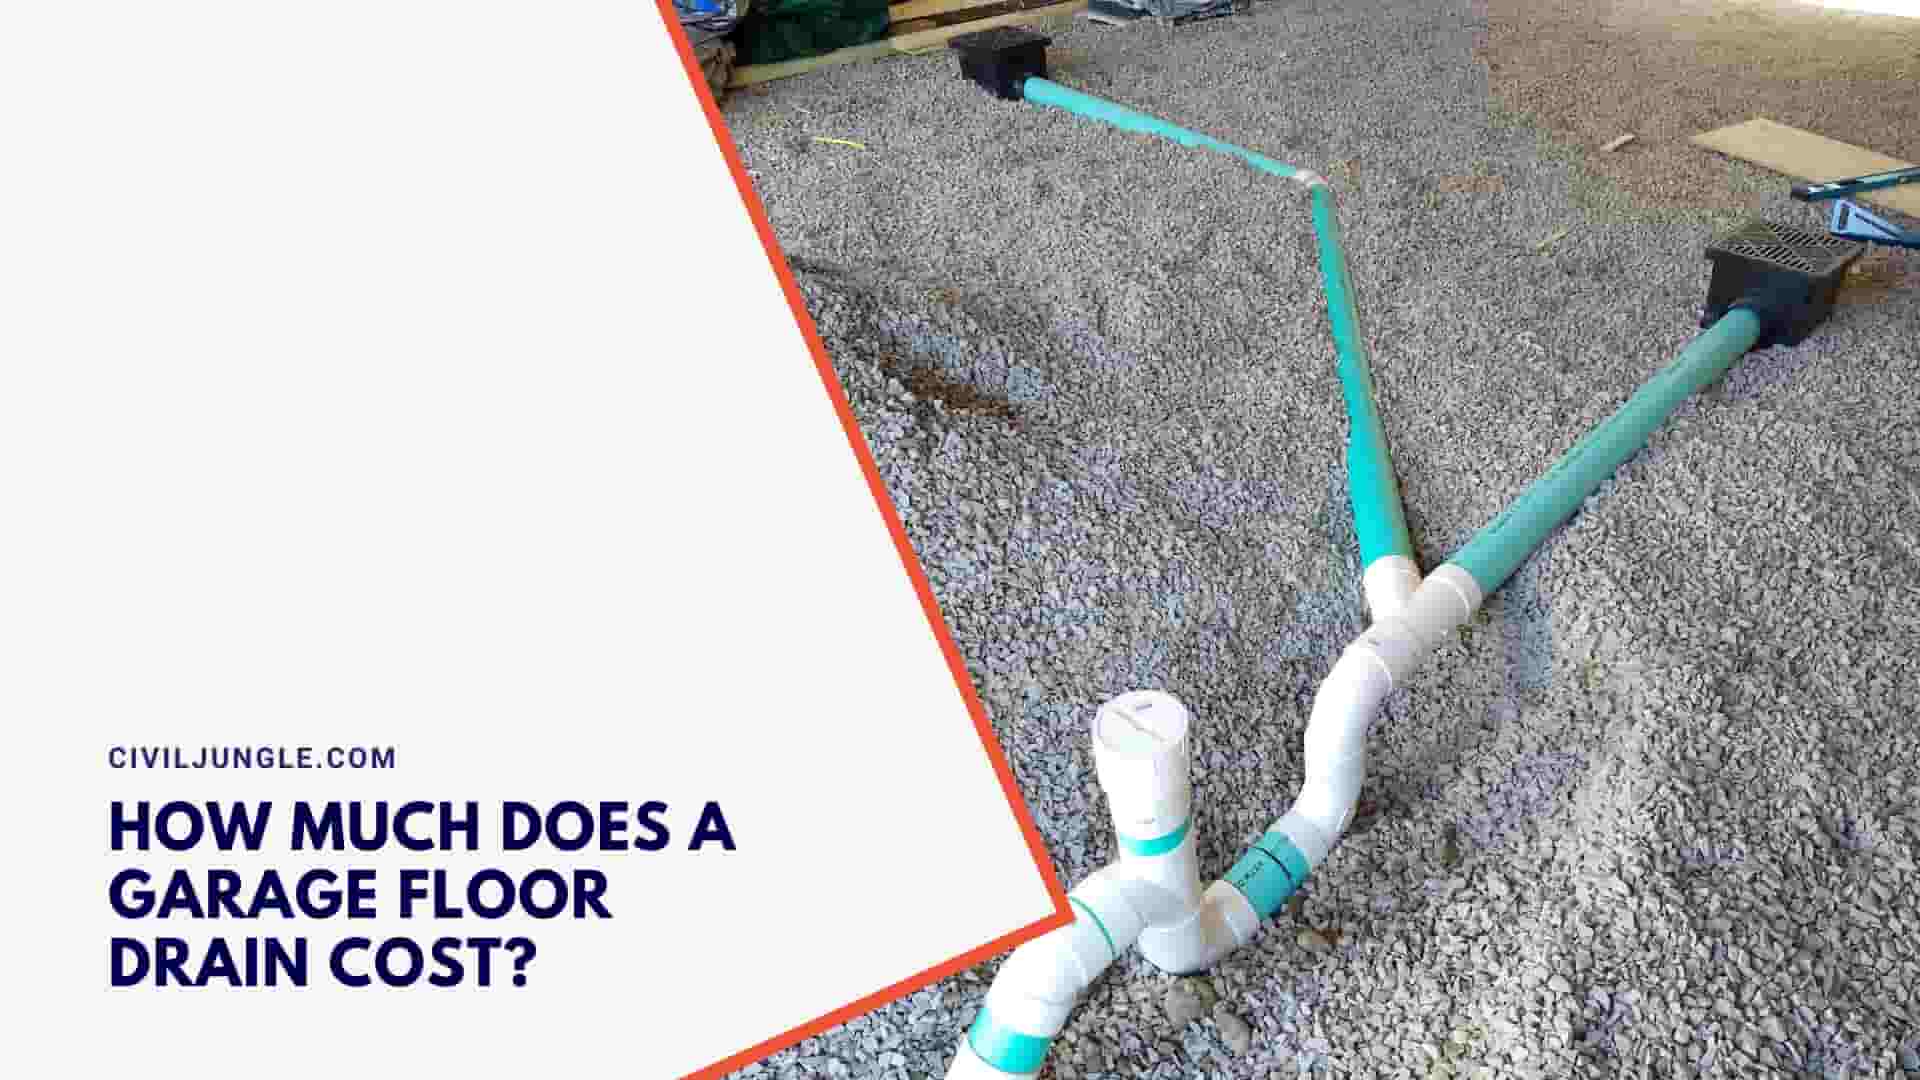 How Much Does a Garage Floor Drain Cost?